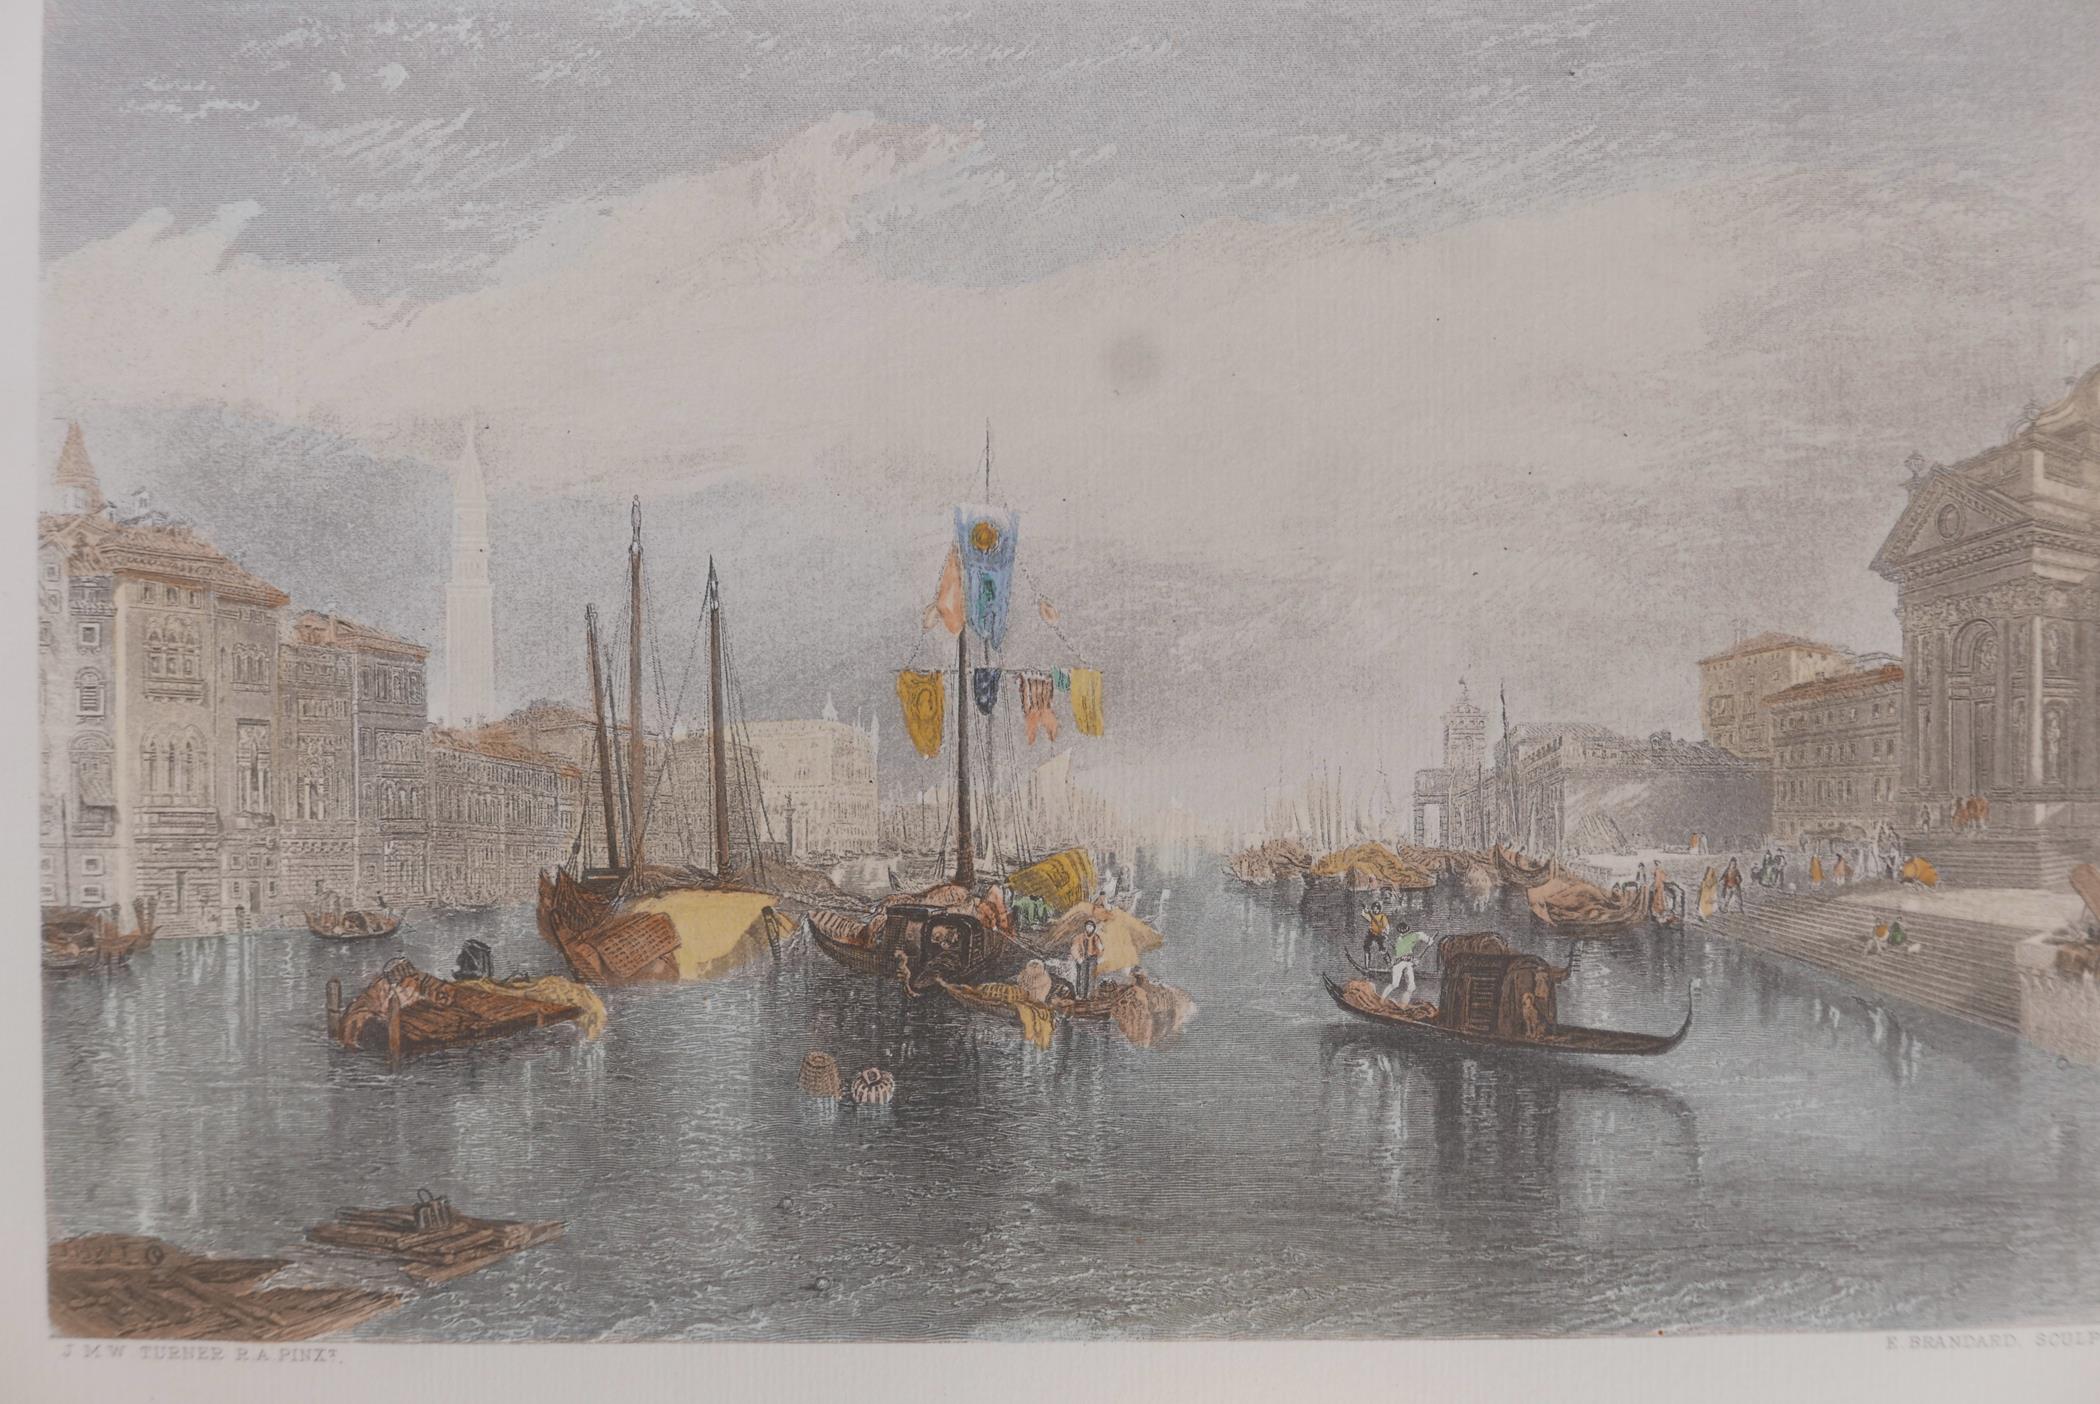 A set of three coloured engravings depicting Venice, after J.W.M. Turner, engraved by J.C. Armytage, - Image 2 of 4